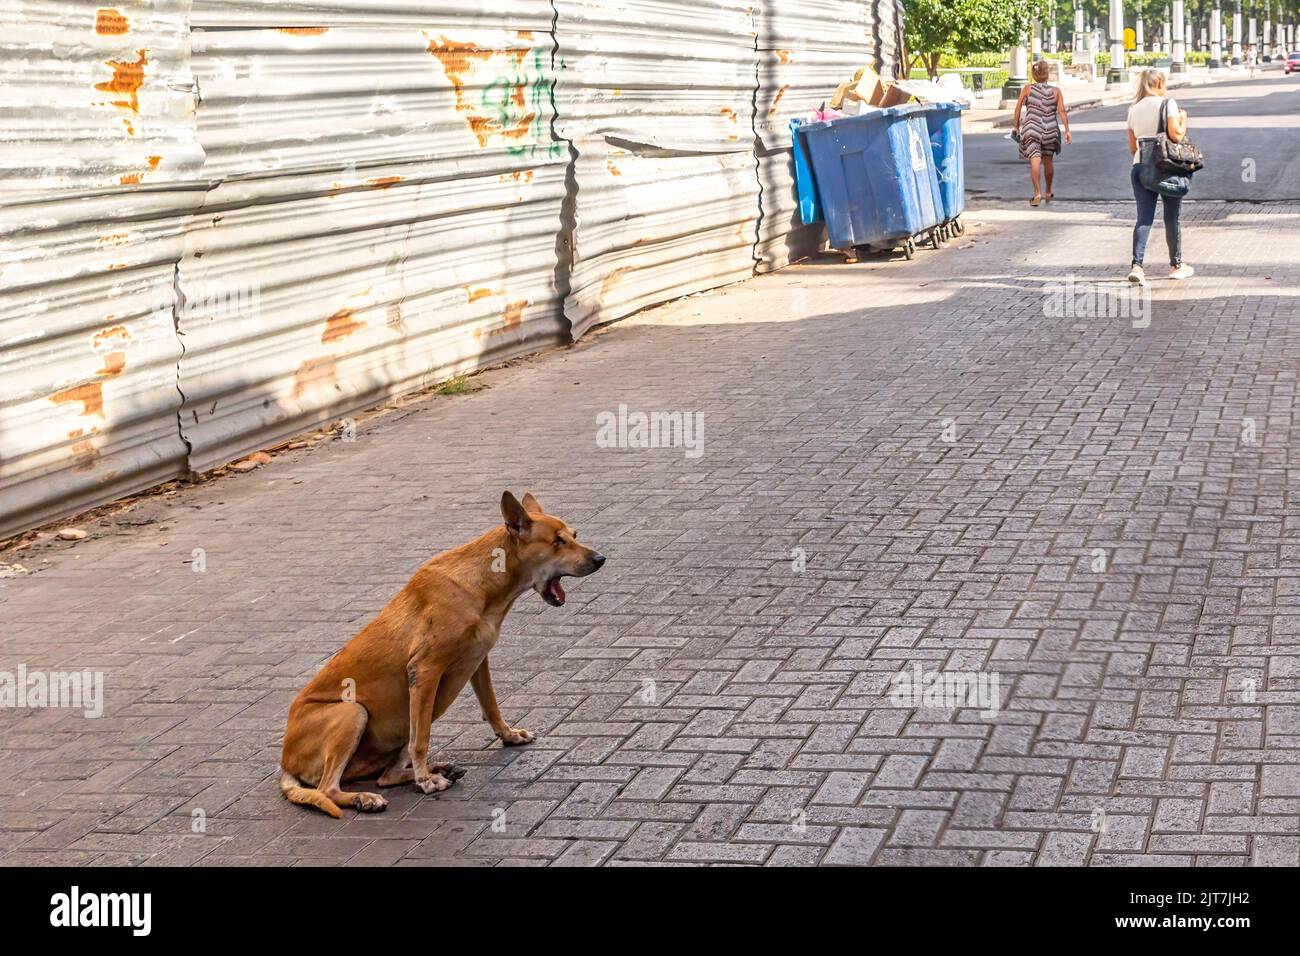 A stray dog yawning in a cobblestone street in Old Havana. A metallic fence to the left indicates a building with danger of collapsing. Stock Photo